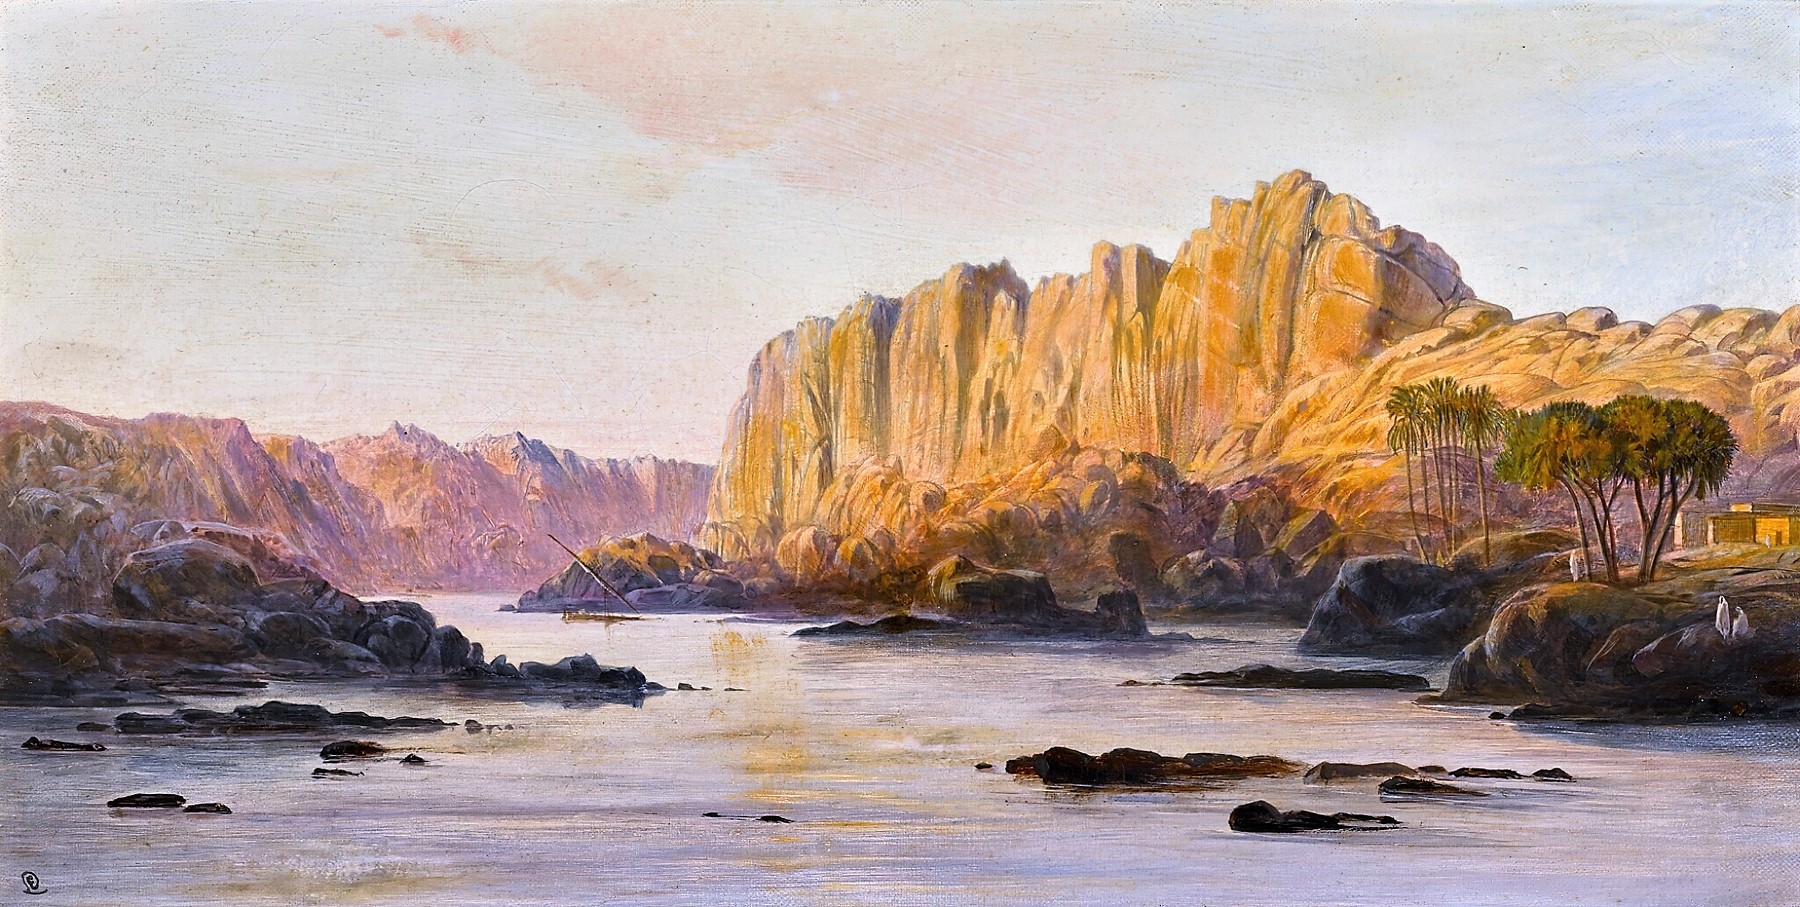 The landscape at Bab el-Kalabsha. Painting by Edward Lear (1871). Public domain, downloaded from Artvee.com